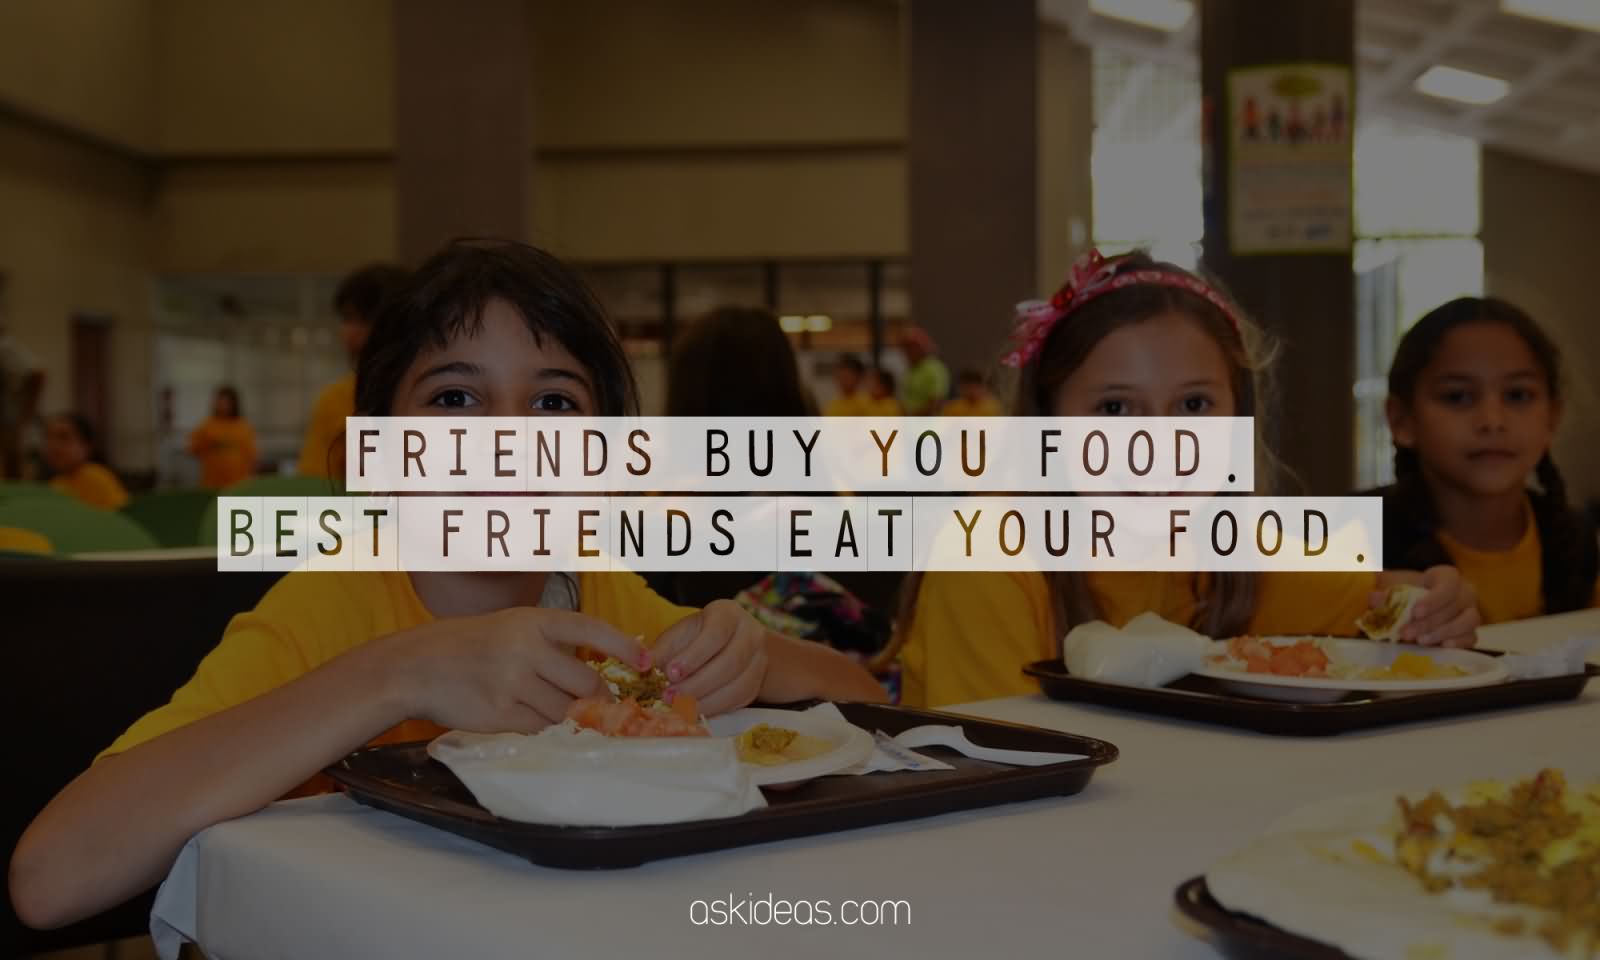 Friends buy you food. Best friends eat your food.